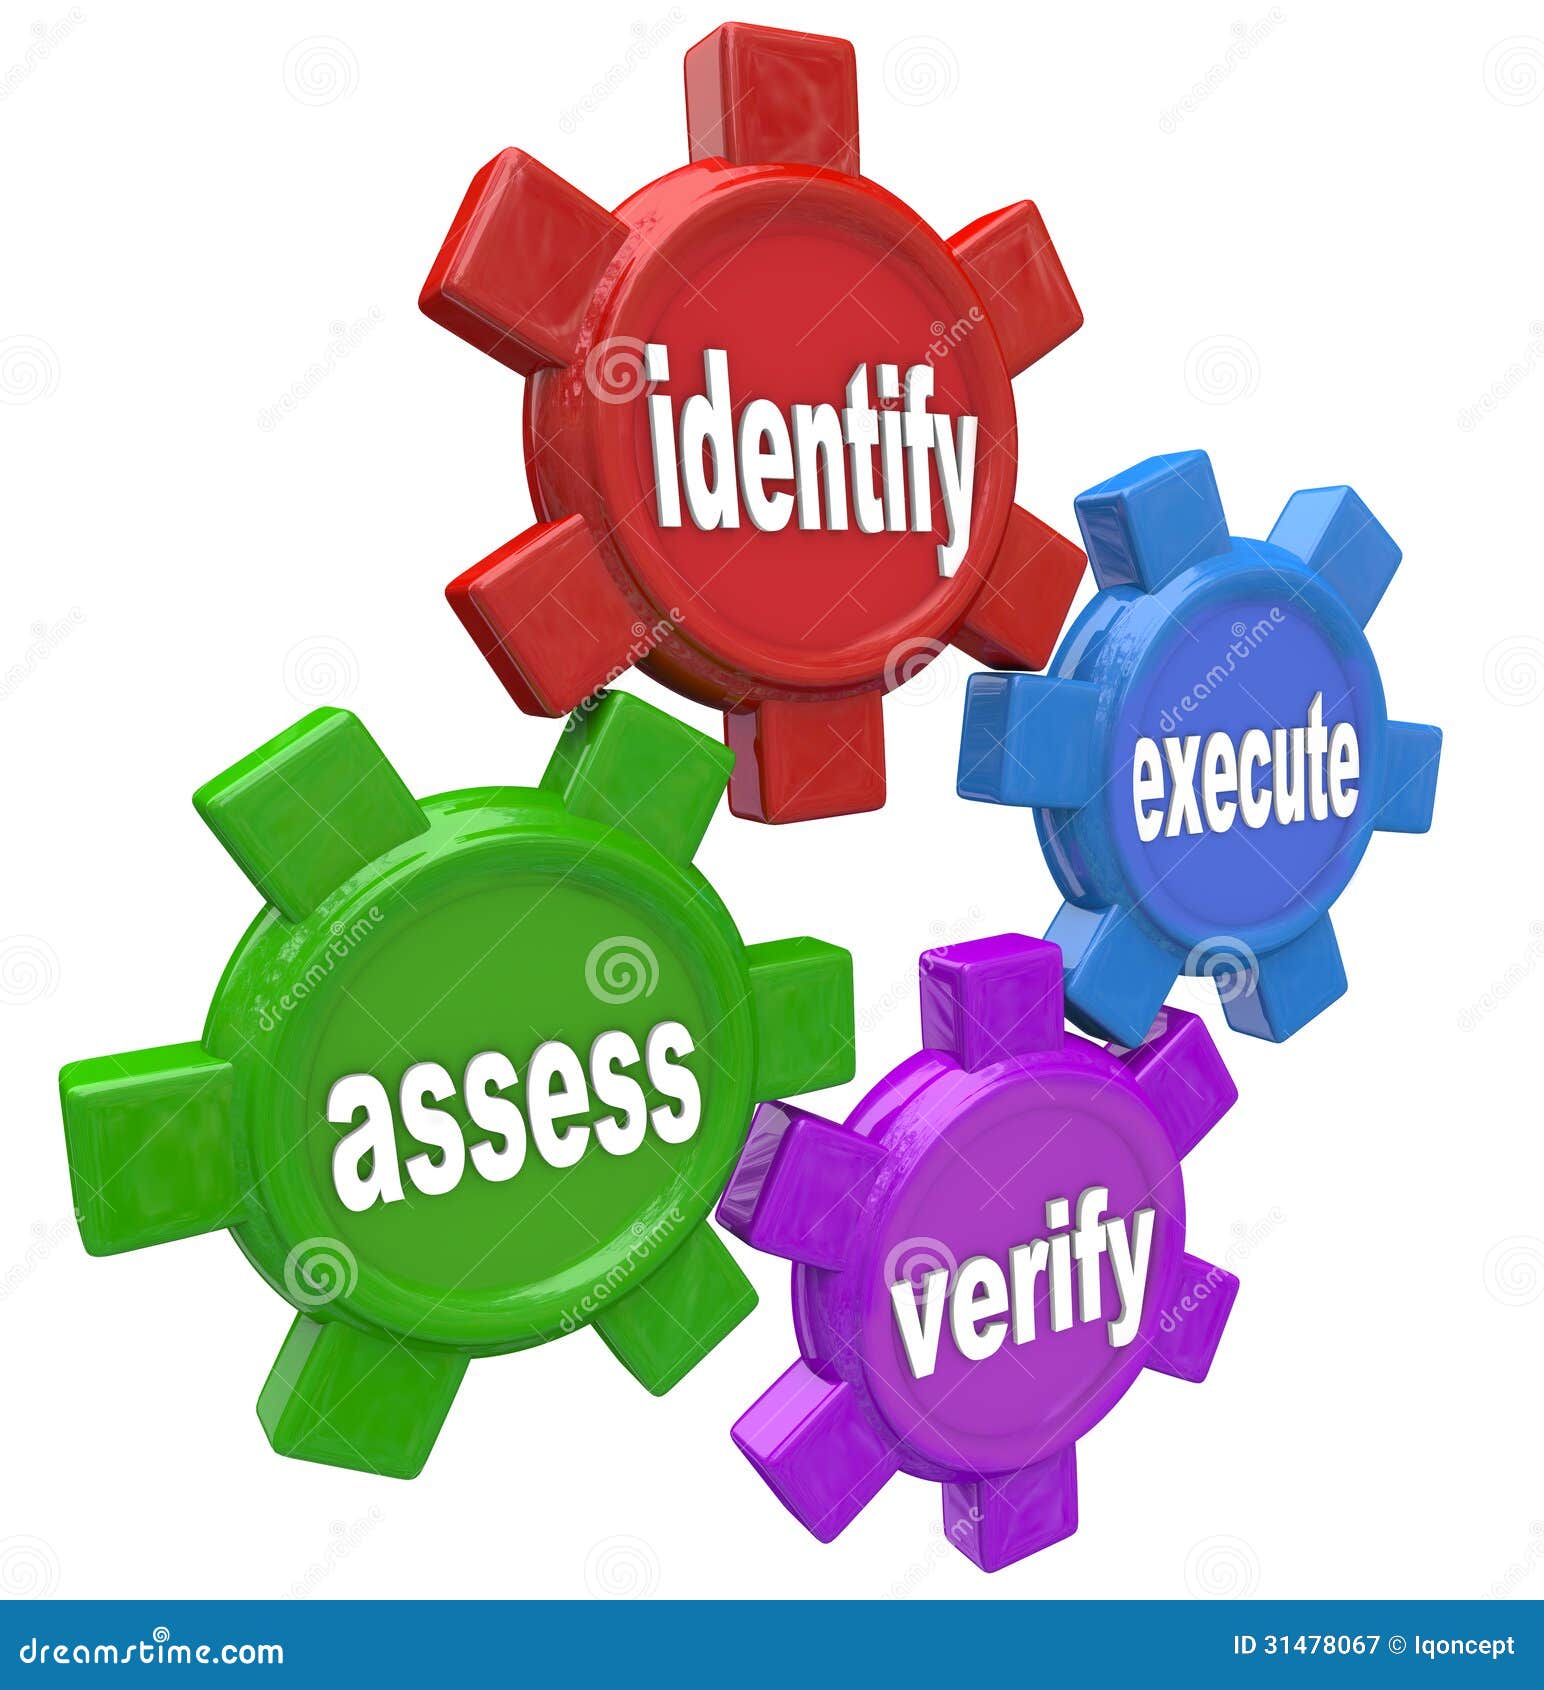 how to handle problem identify assess execute verify